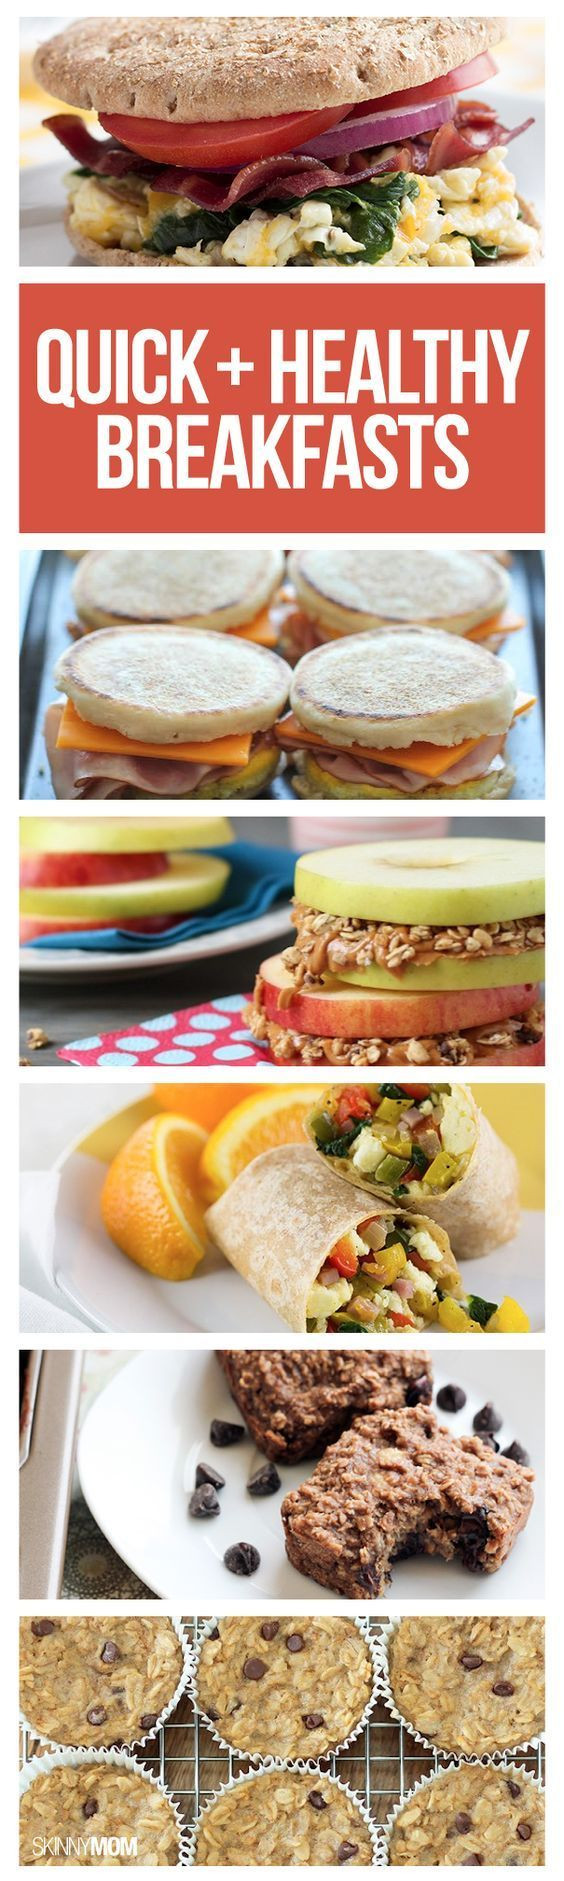 Quick Healthy Breakfast Ideas
 17 Best images about Healthy Meals on Pinterest